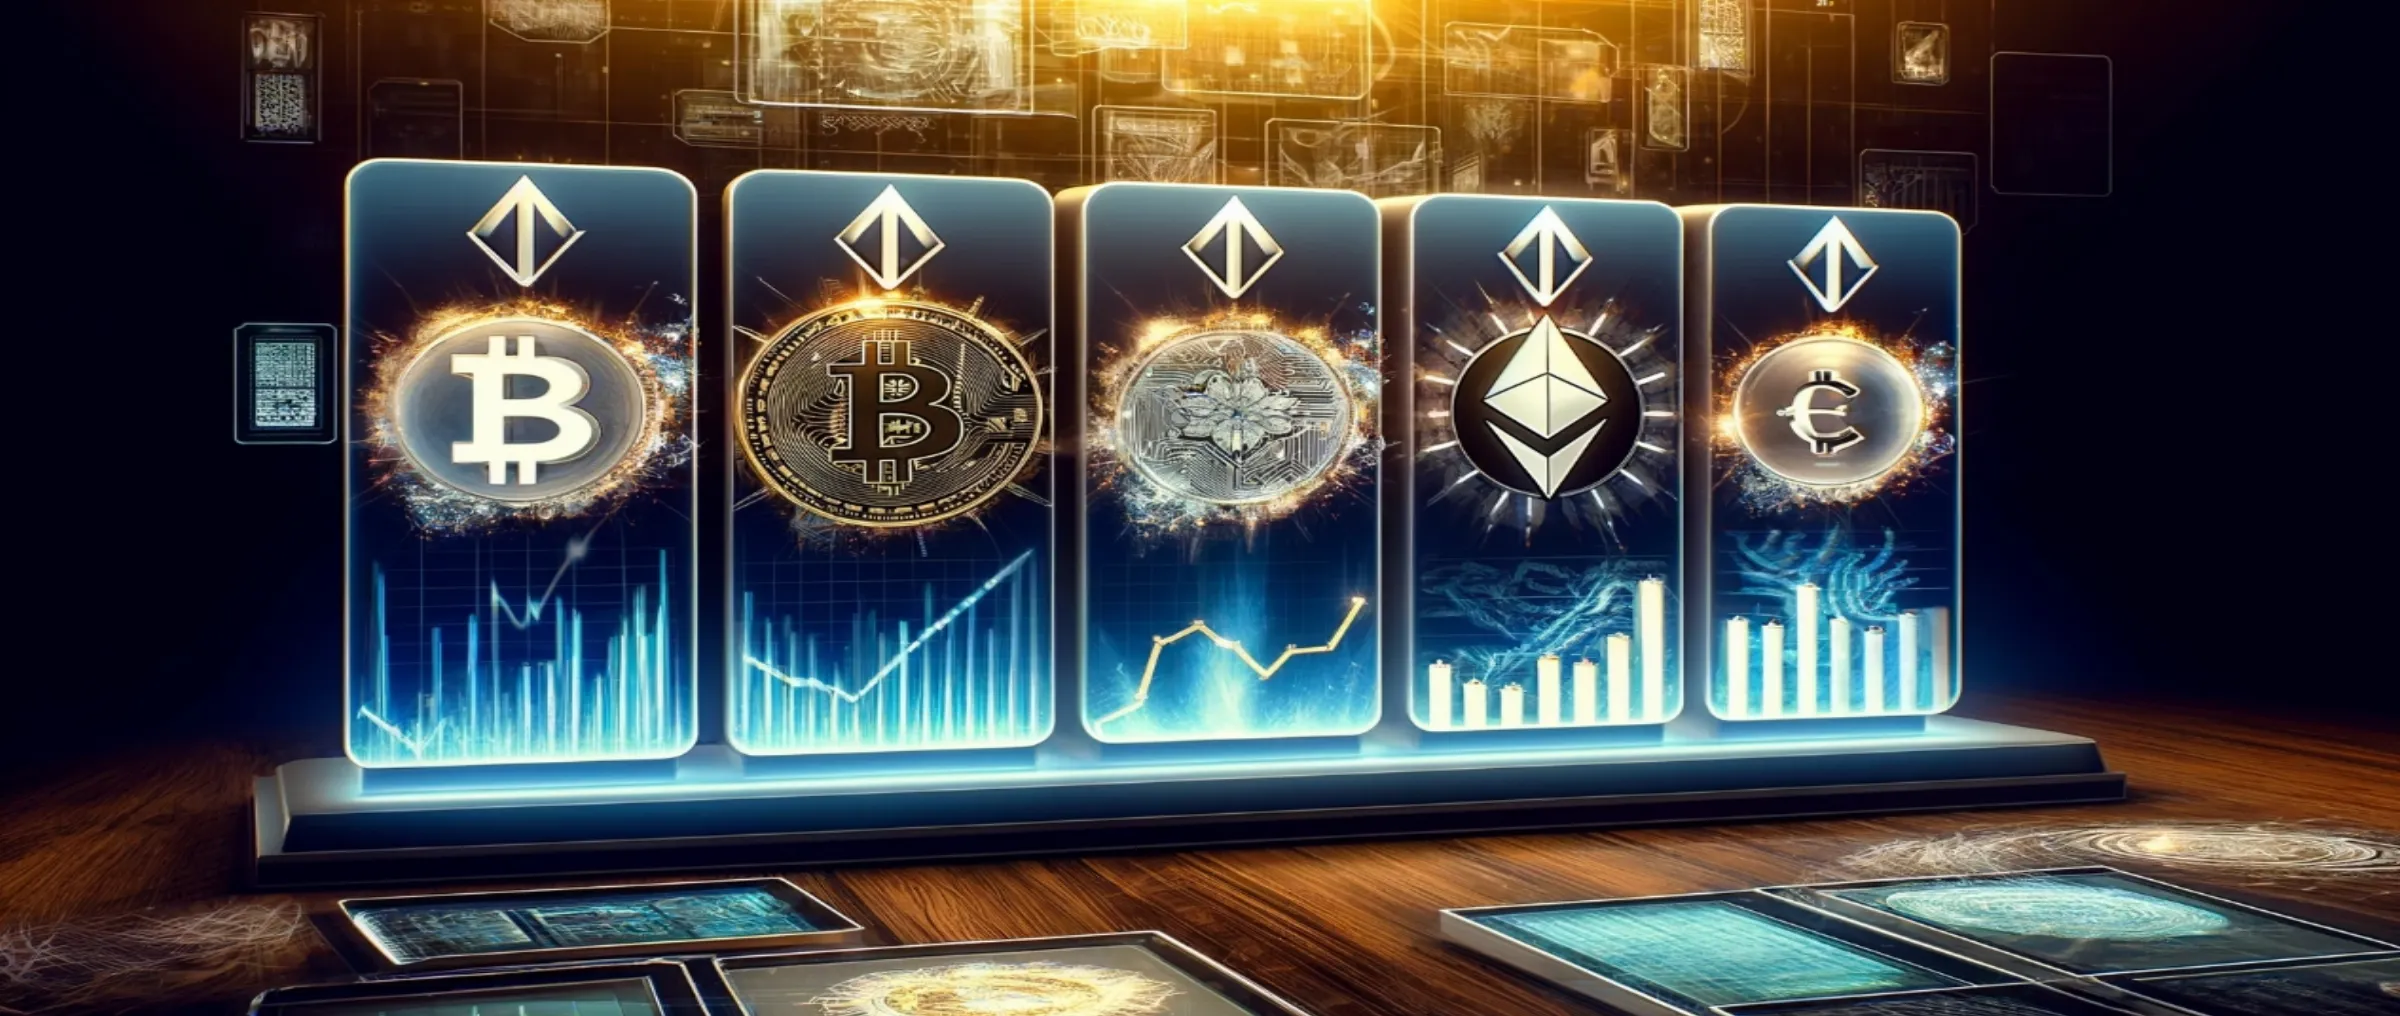 Top Altcoins Potentially Heading for Significant Price Growth